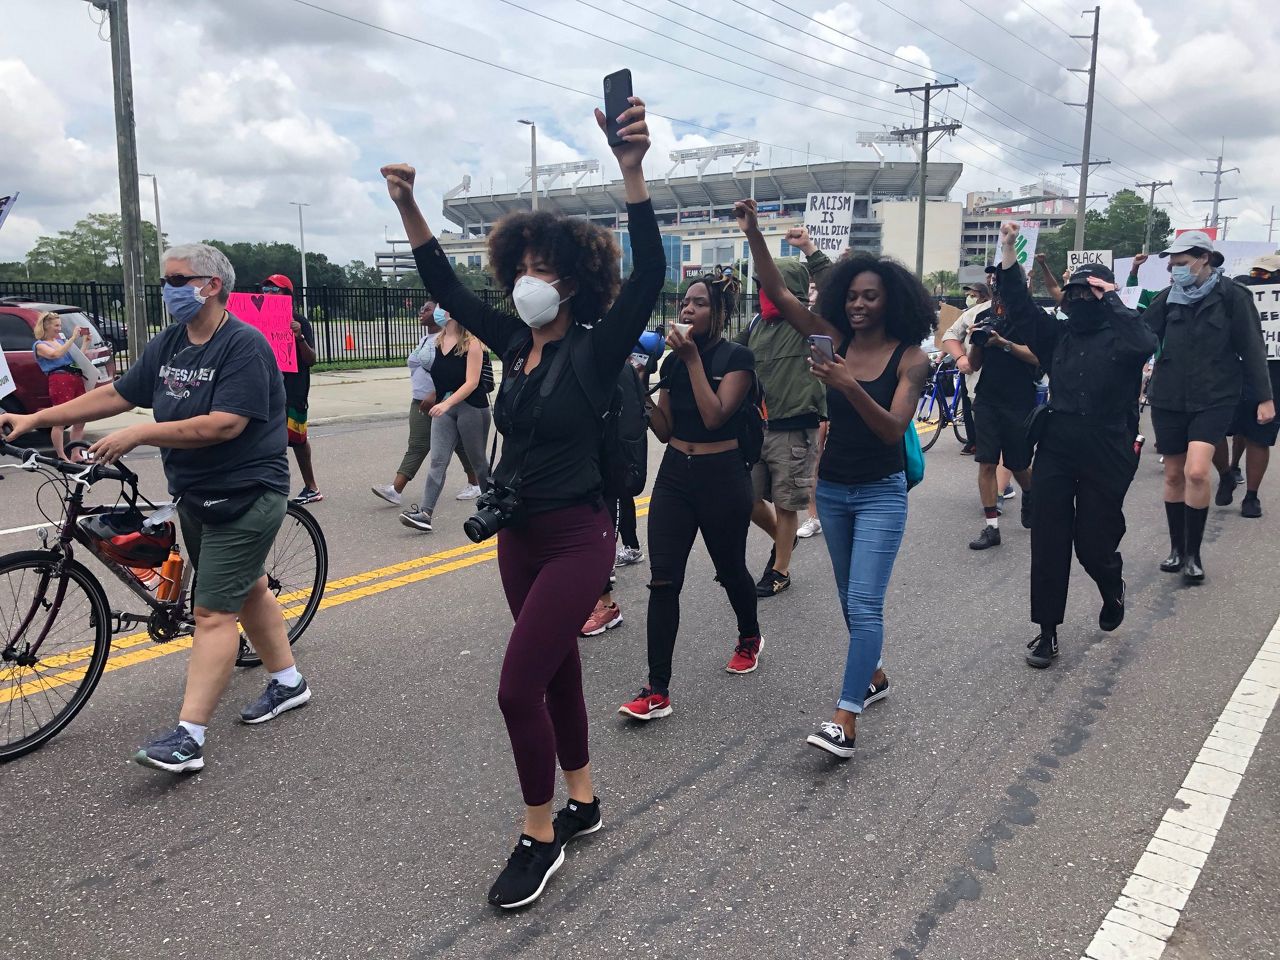 Black Lives Matter protesters march along W. Tampa Bay Boulevard in Tampa, Saturday, June 13, 2020. (Ashley Paul/Spectrum Bay News 9)